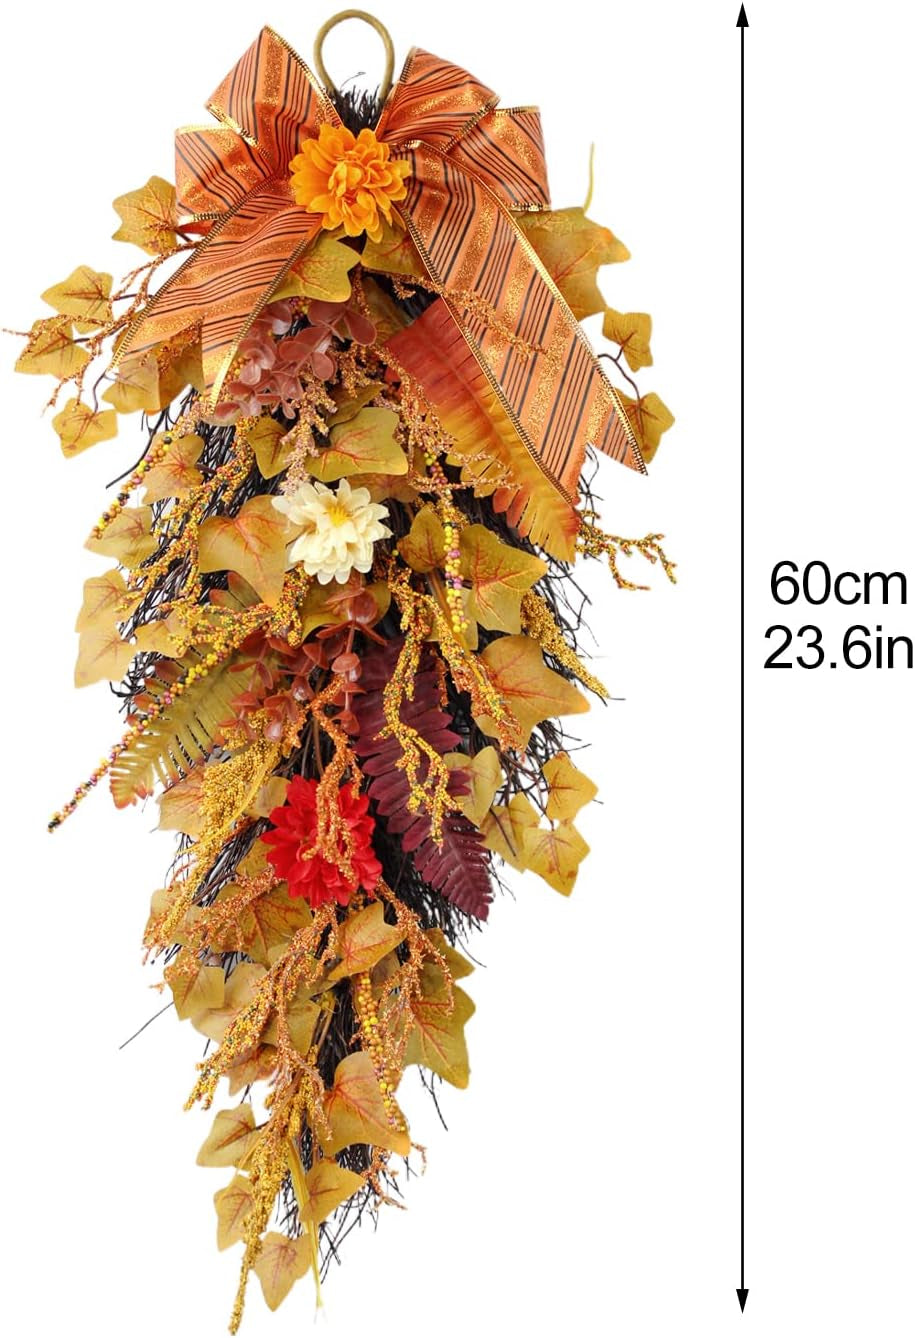 Fall Harvest Teardrop Swag, 23.6Inch Artificial Carnation Flower Swag with Maple Leaves, Bowknot, Artificial Fall Maple Swag Front Door Teardrop Wreath for Thanksgiving Halloween Decor